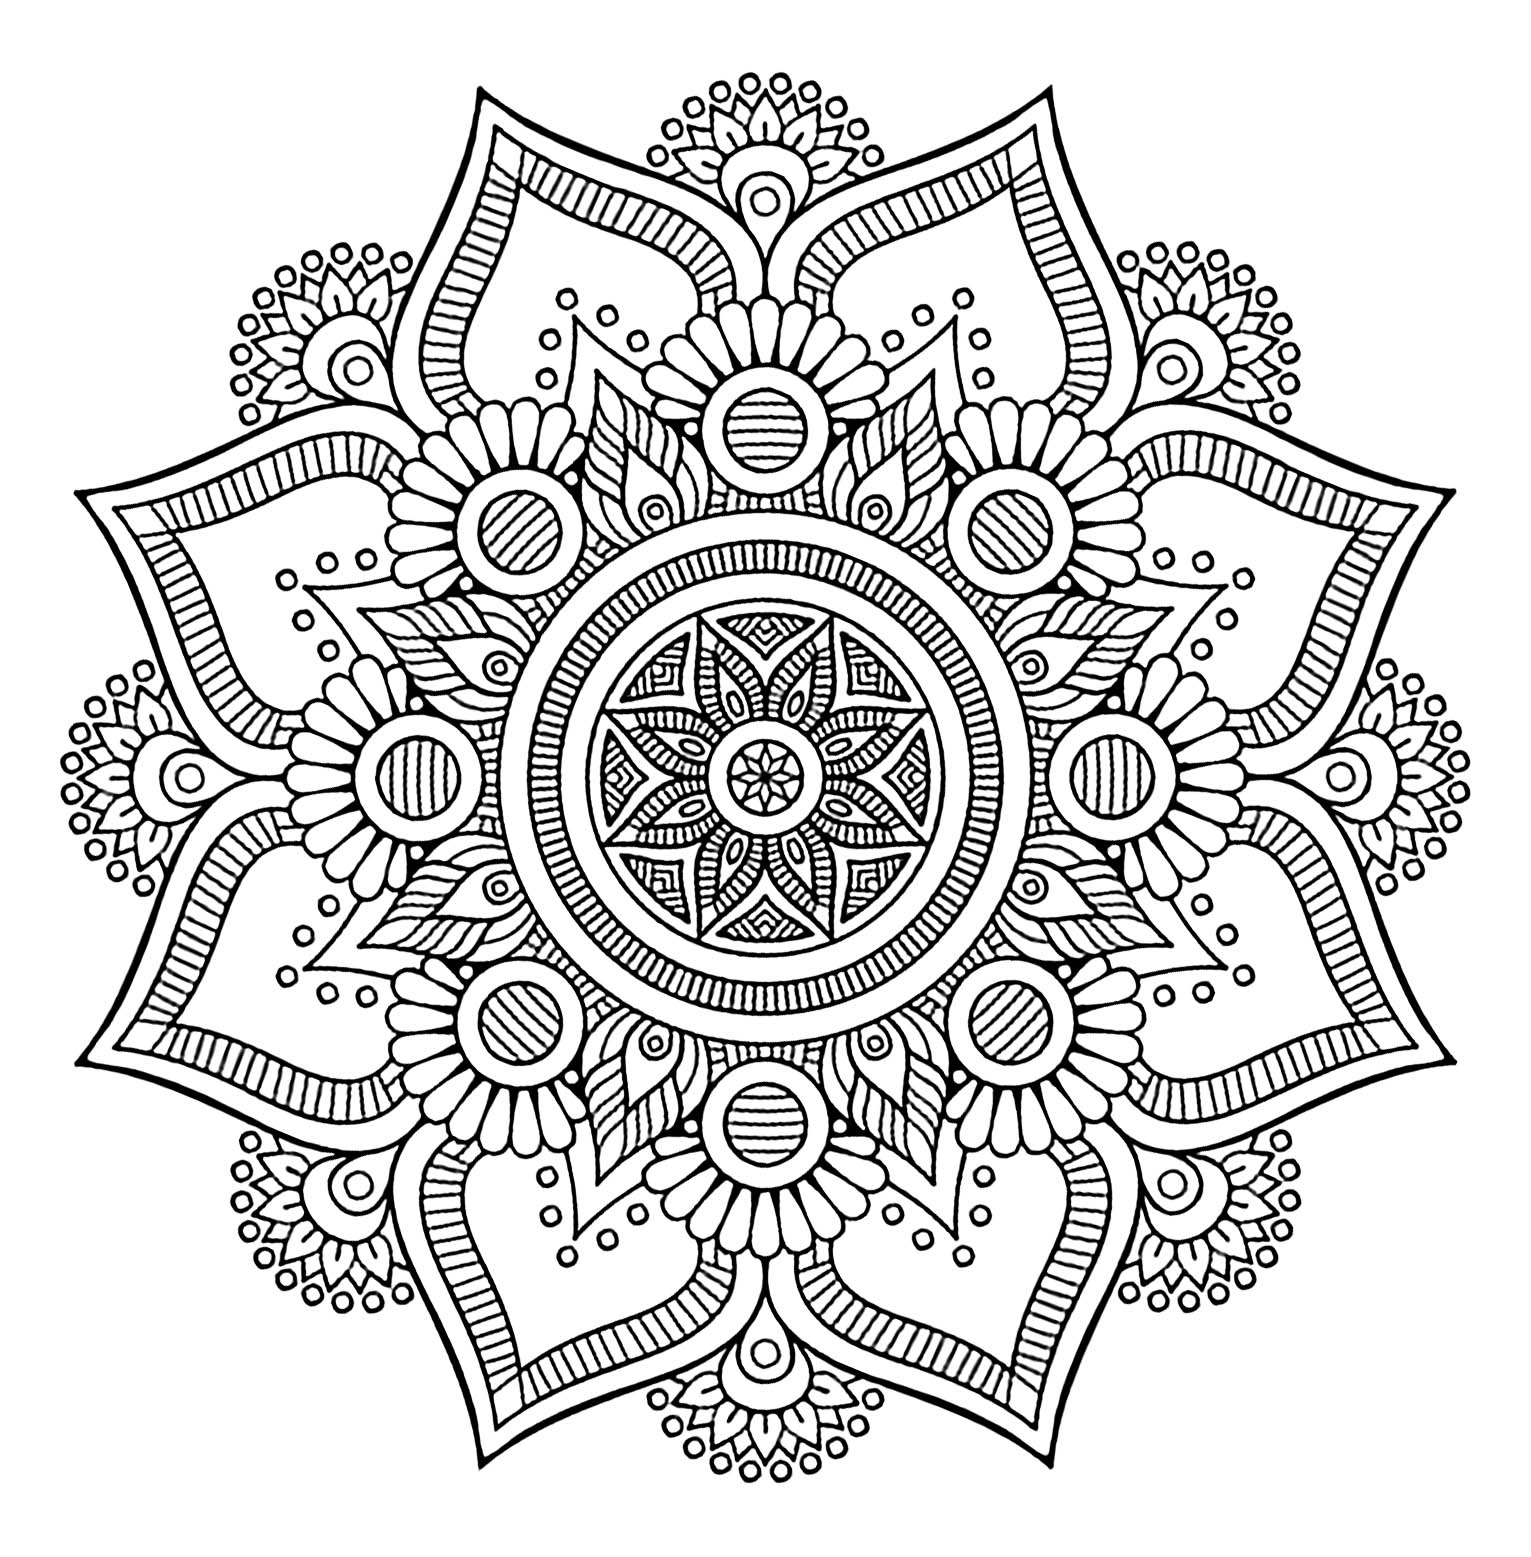 The big flower Mandalas Adult Coloring Pages